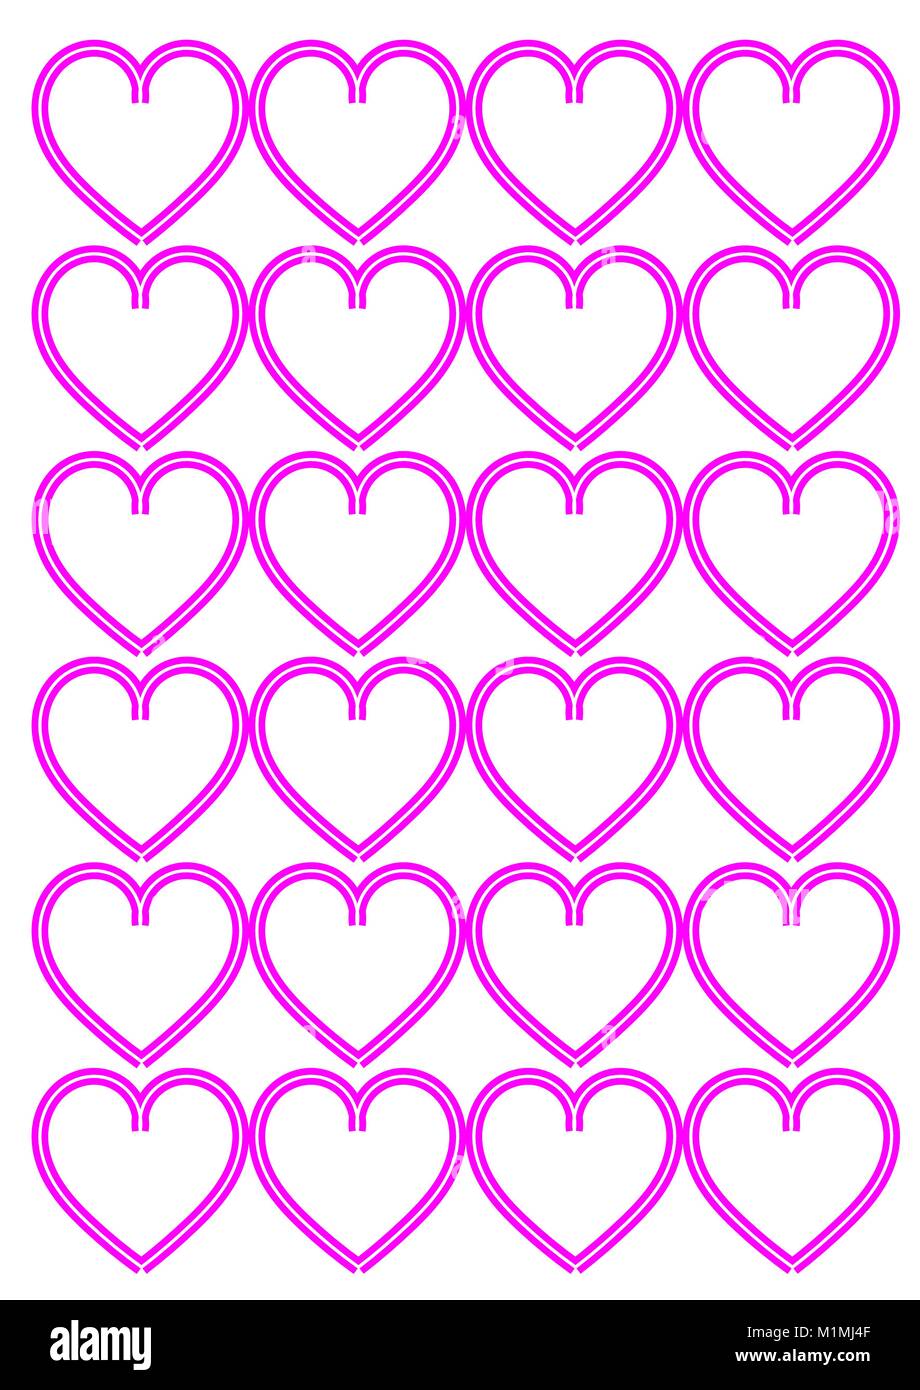 Pink Heart Pattern On White Background Stock Vector